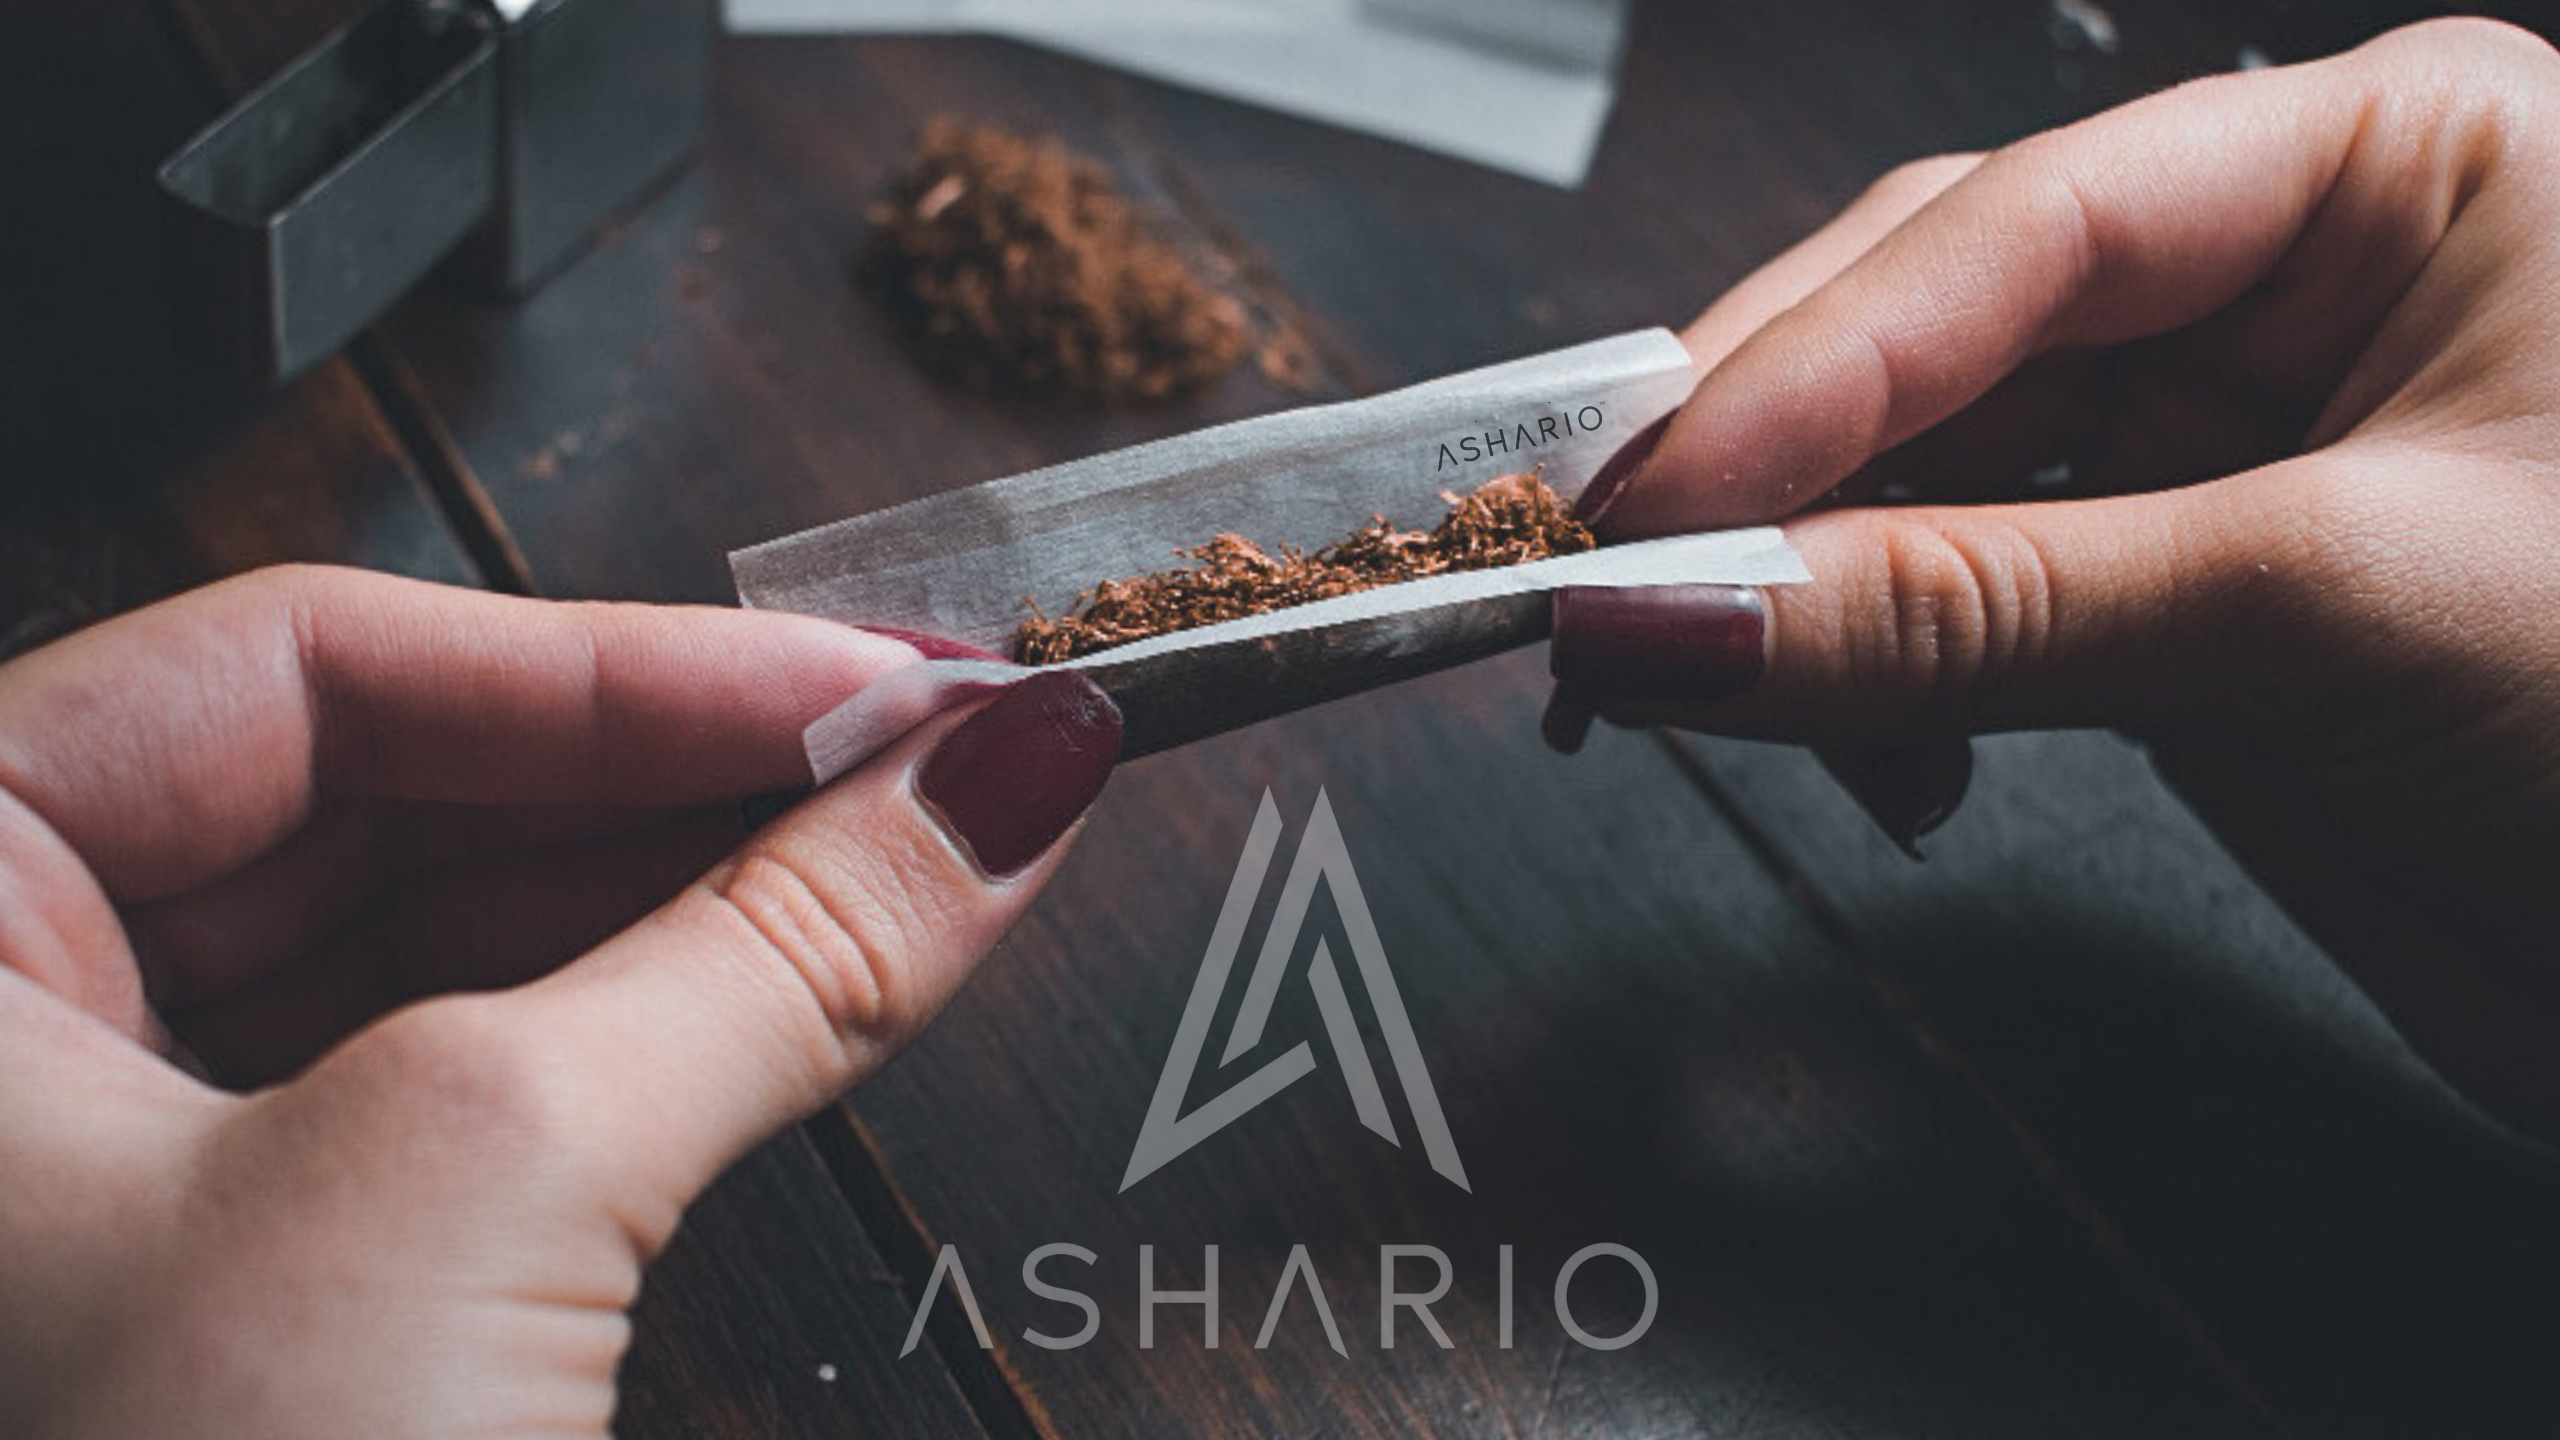 Learn the art of rolling a perfect joint with Ashario Cannabis's comprehensive guide. From selecting the finest cannabis strains to mastering the technique, this step-by-step tutorial covers everything you need to know.